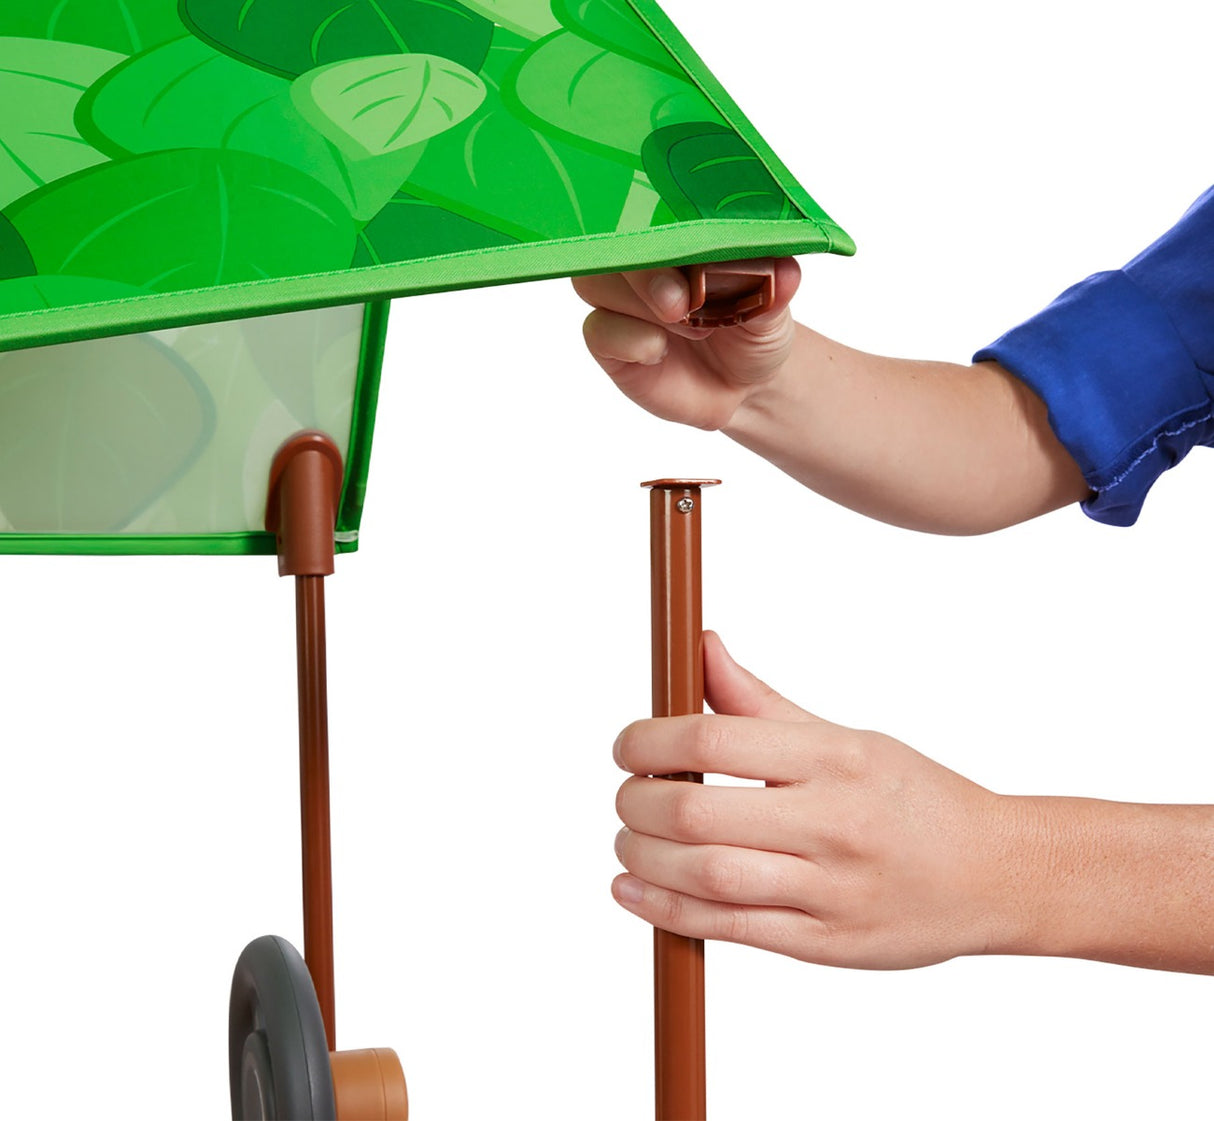 Play & Fold Away Treetop Tower's retraceable canopy poles